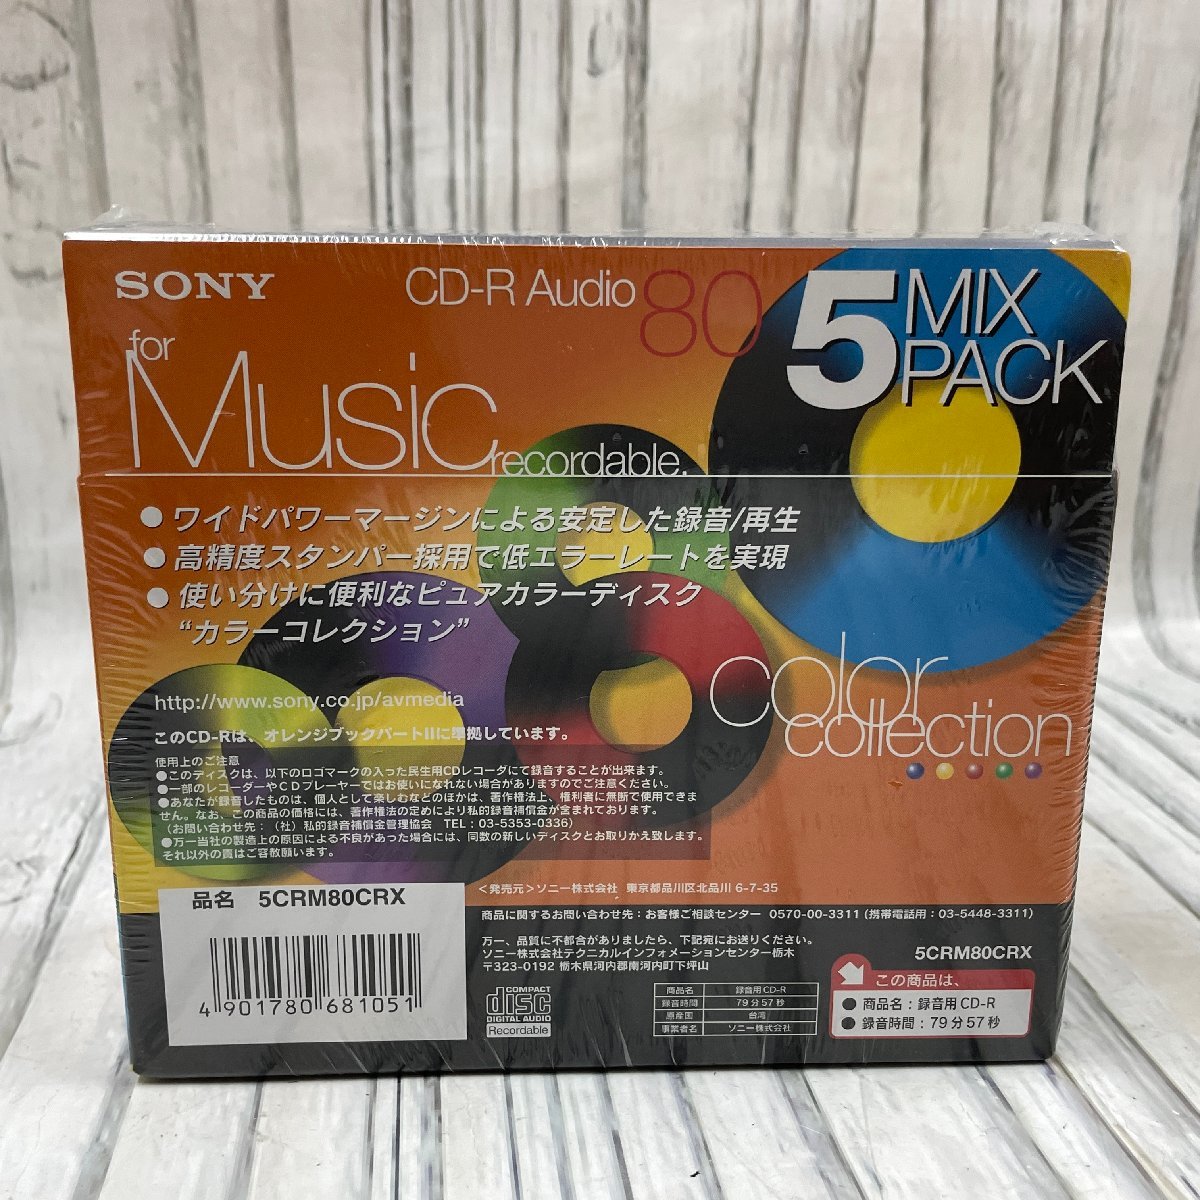 m002 E2(60) 1 未開封 CD-R maxell マクセル 650MB CDR650S.PW1P10S 10PACK 薄型 スリム ＋ SONY ソニー Audio 5PACK_画像9